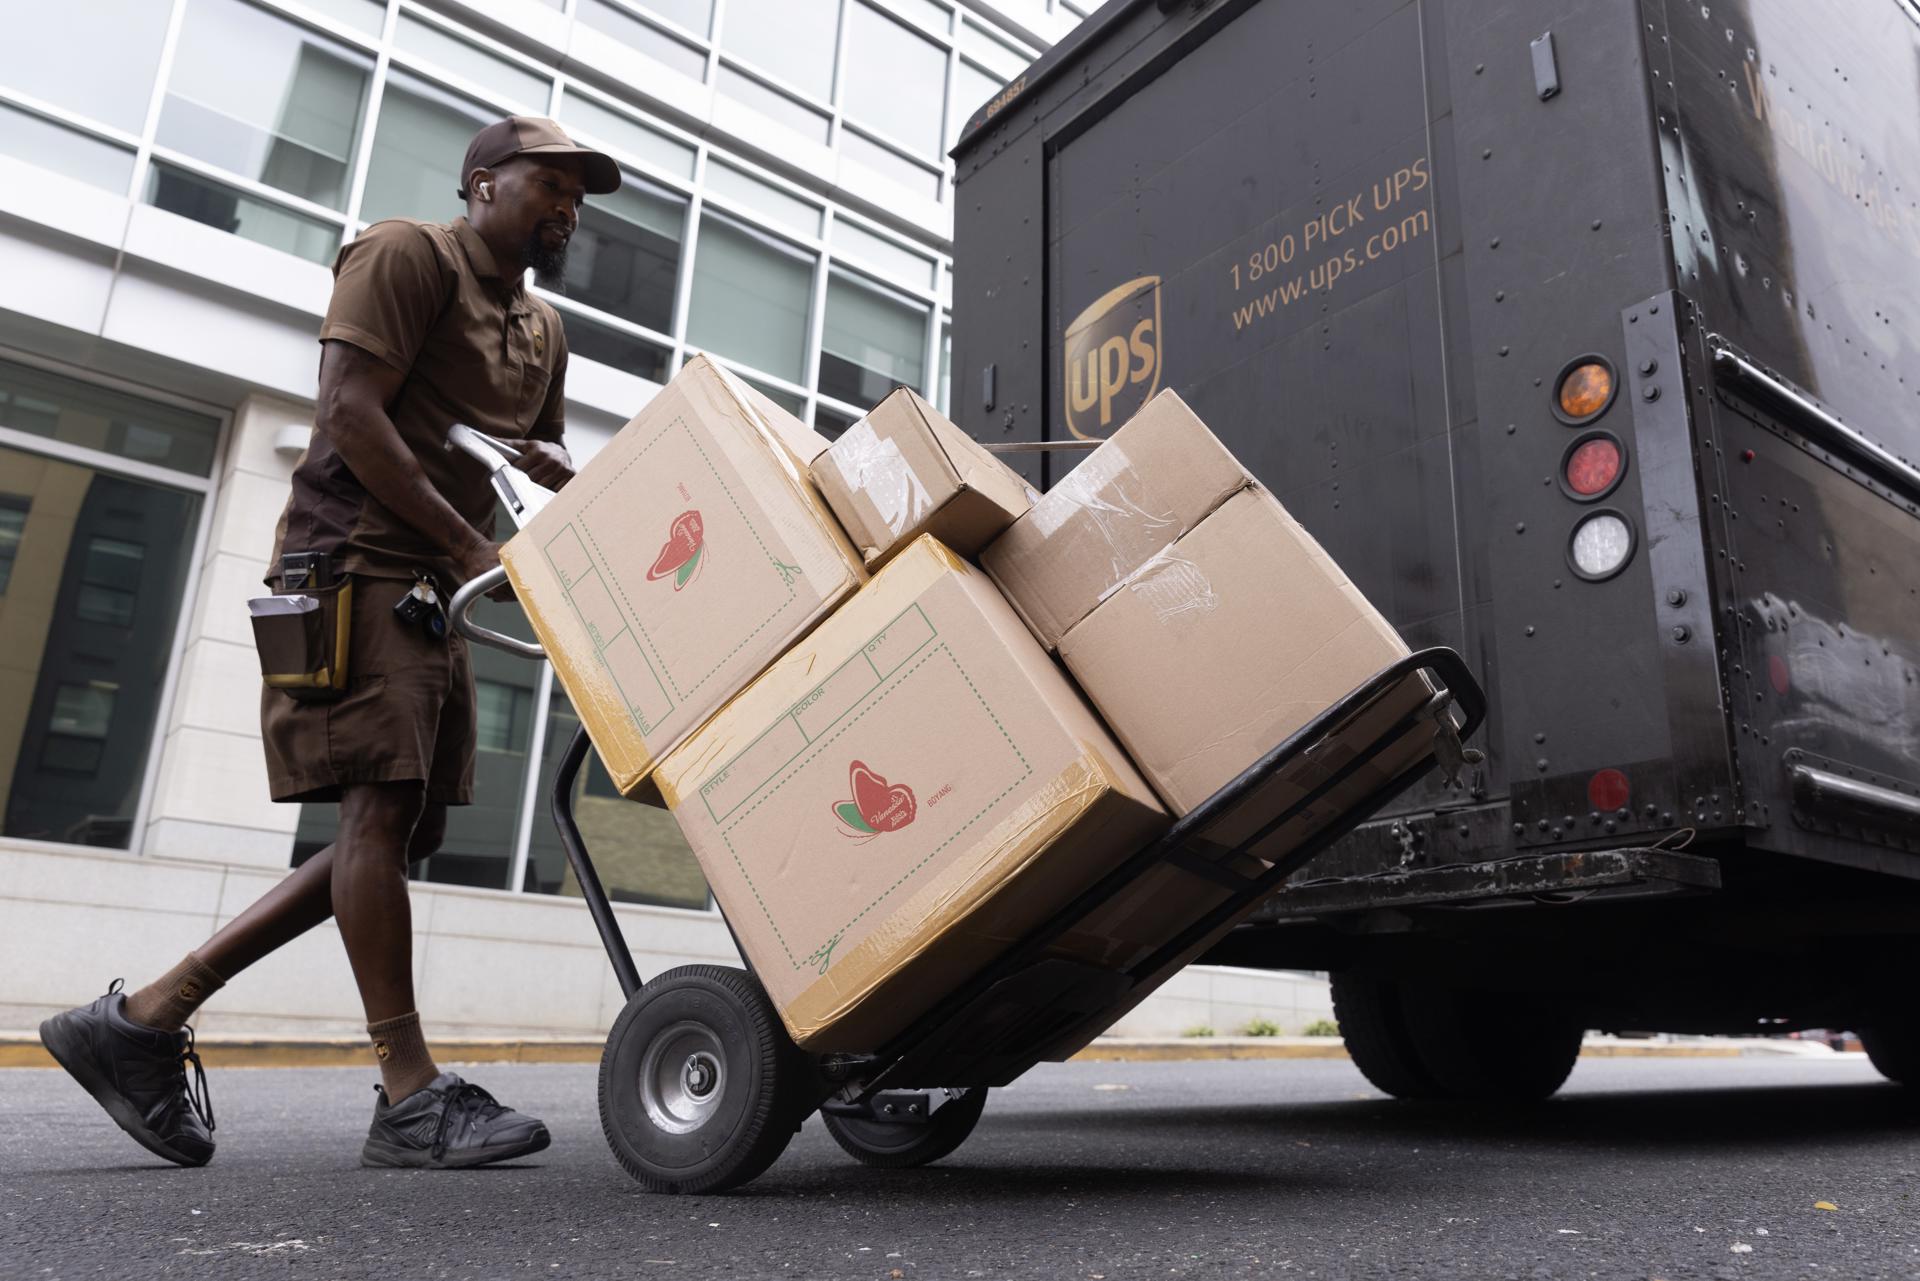 Washington (United States), 06/10/2023.- A UPS truck driver unloads boxes from a truck onto a dolly in Washington, DC, USA, 06 October 2023. The United States economy added 336,000 jobs in September 2023, according to a new jobs report - which far exceeded expectations. The Dow gained three hundred points after the jobs report was released by the Bureau of Labor Statistics. Unemployment in the US has now remained under four percent for the longest stretch since the 1960s. (Estados Unidos) EFE/EPA/MICHAEL REYNOLDS